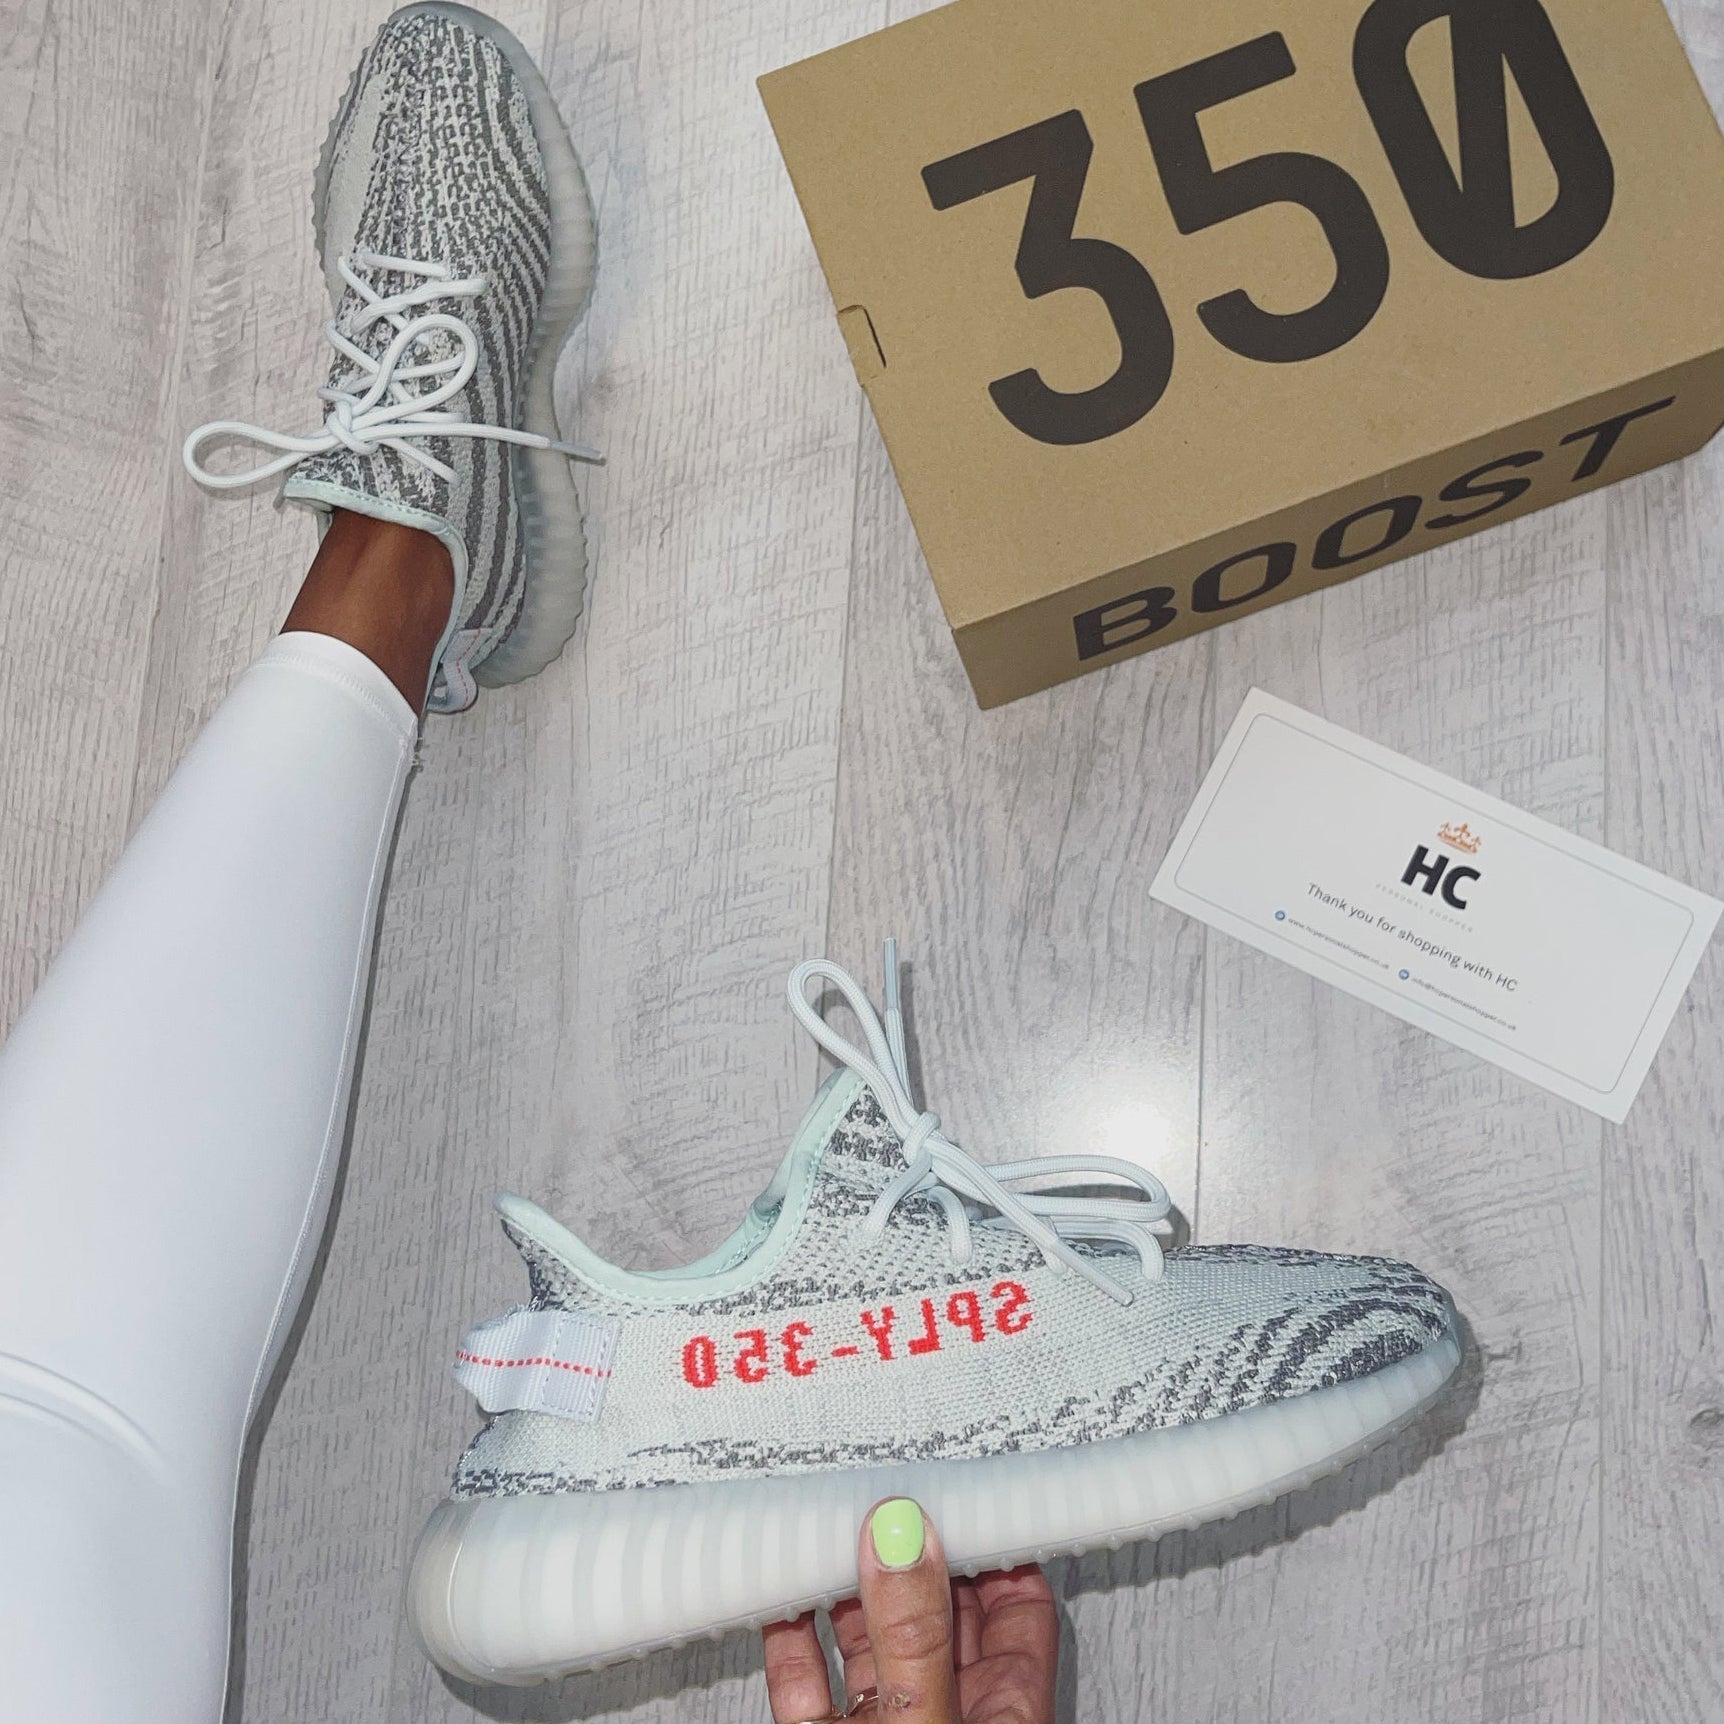 Adidas Yeezy Boost 350 V2 Reflective Men's and Women's S